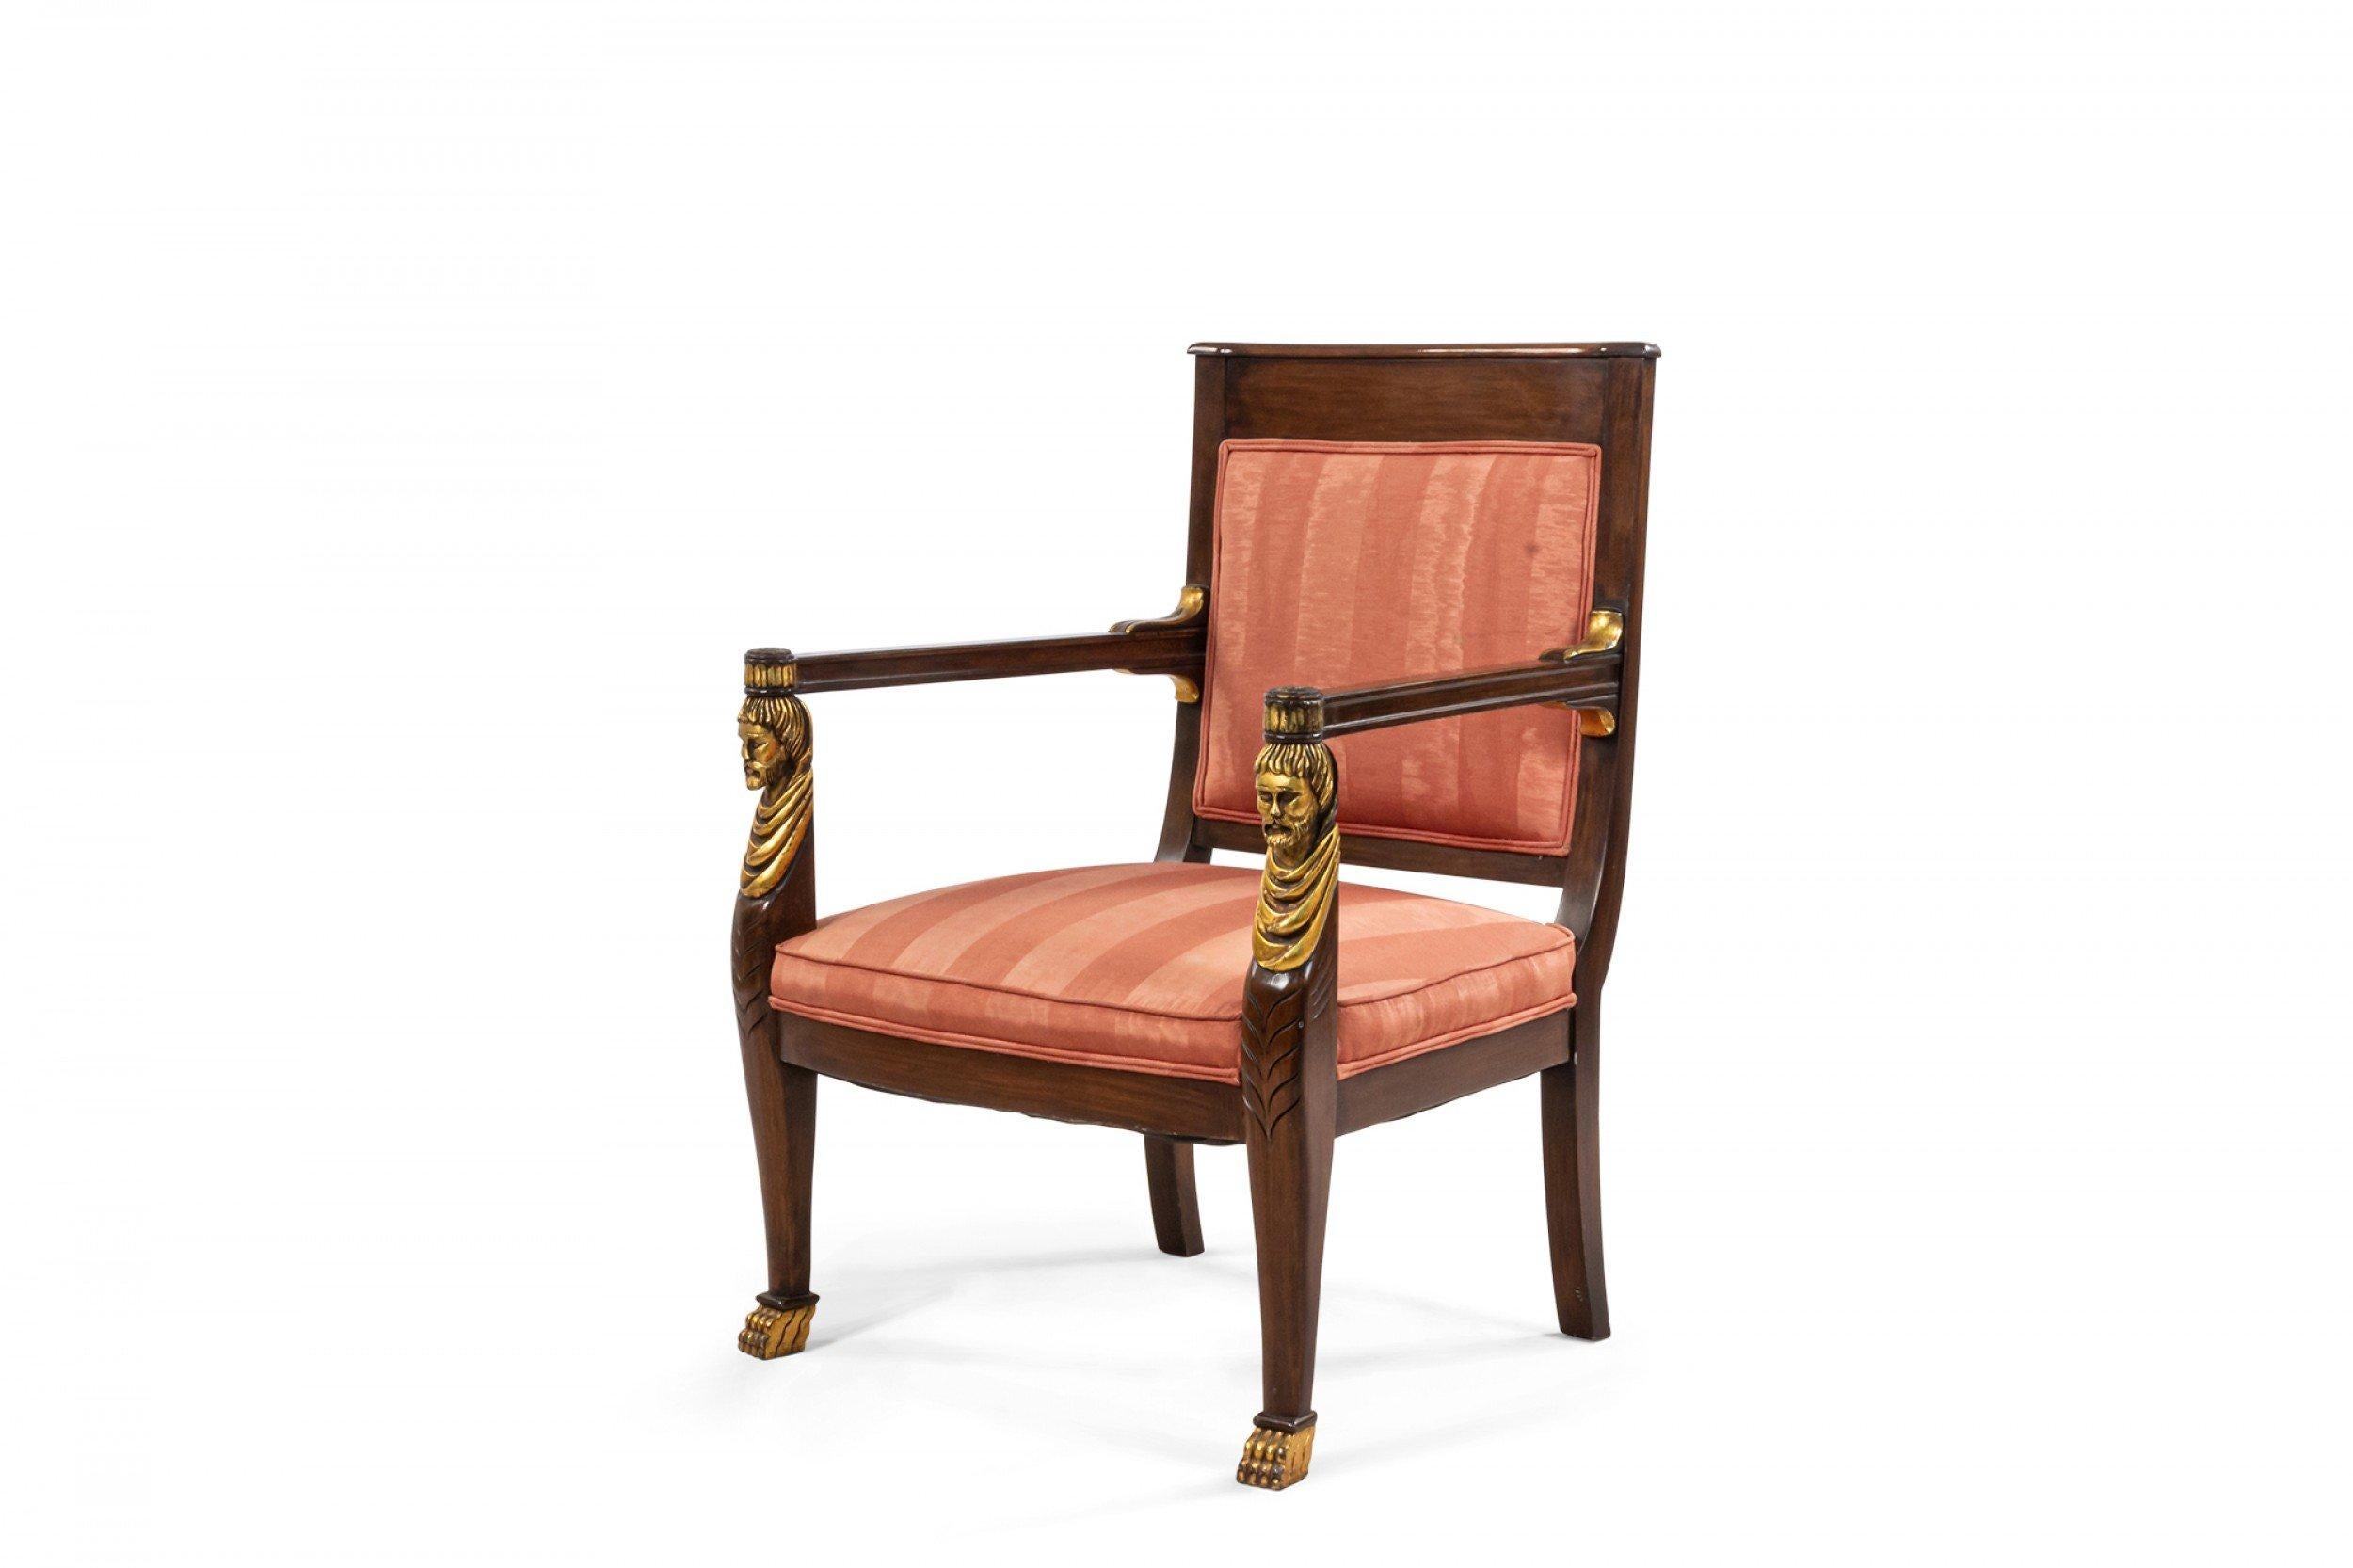 Pair of French Empire style (20th century) mahogany armchairs with gilt feet and classic carved heads detail on arms and pink striped upholstery